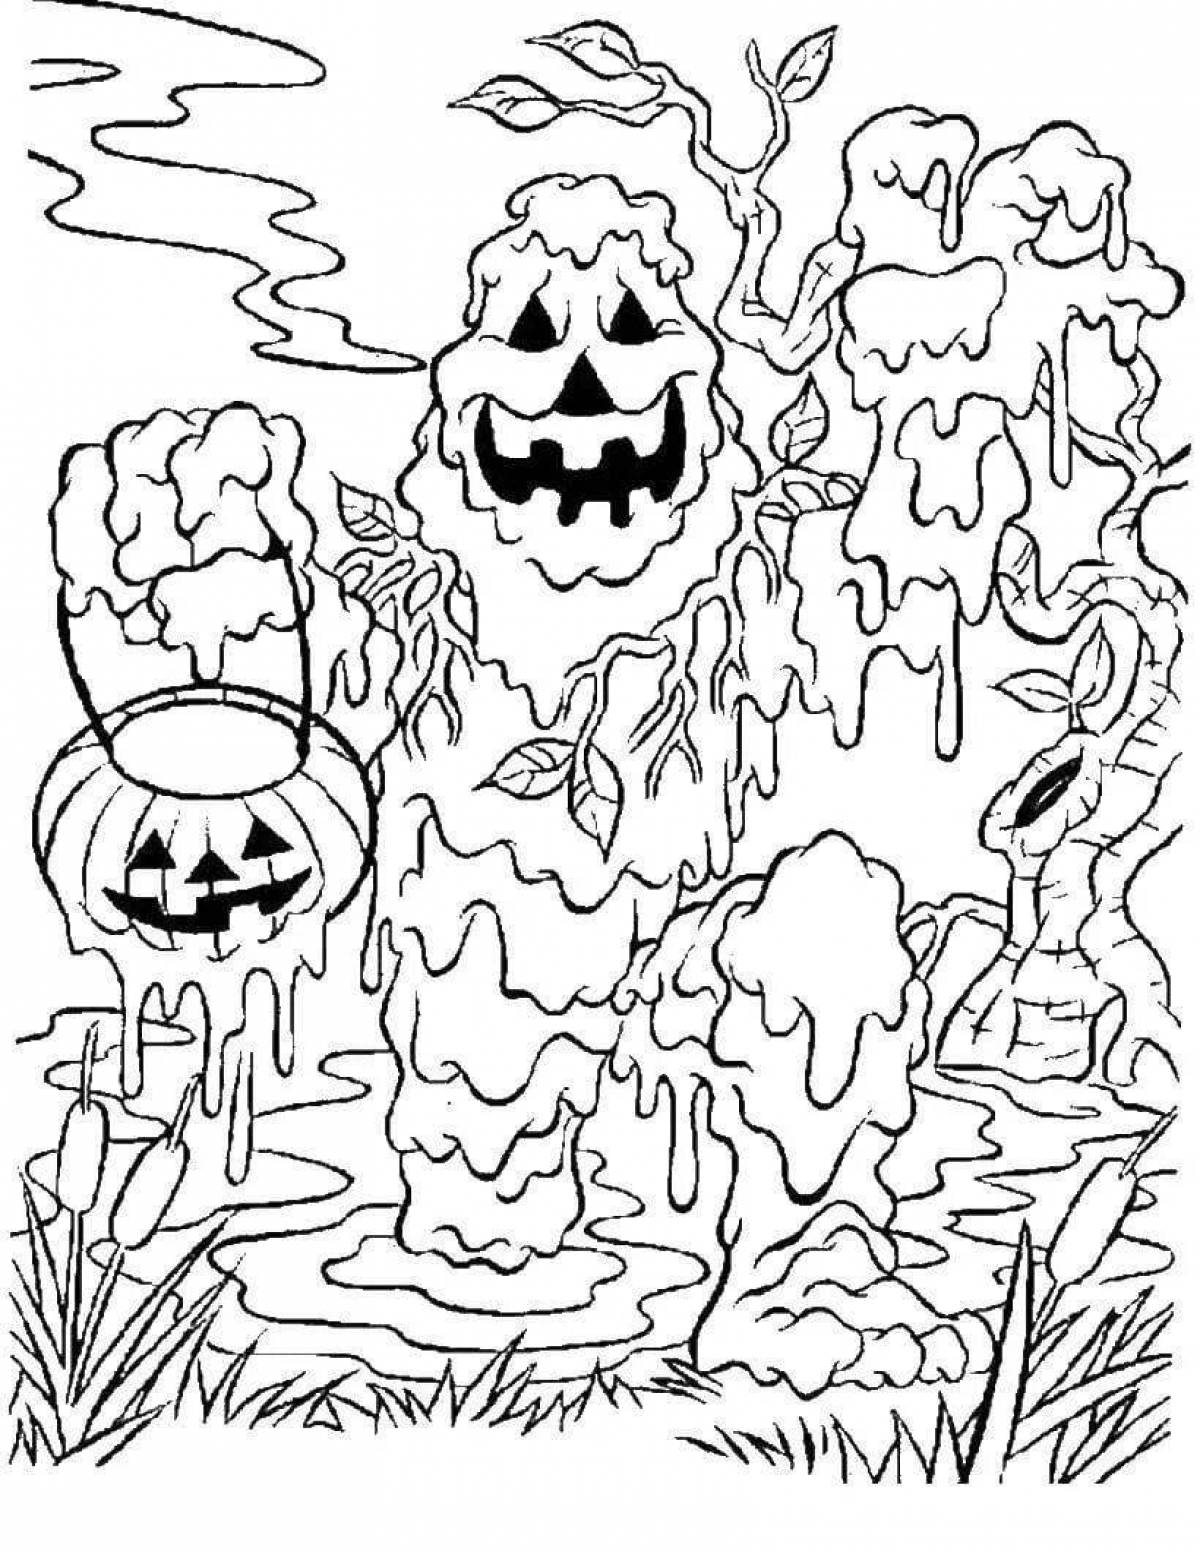 Nerving scary child coloring page